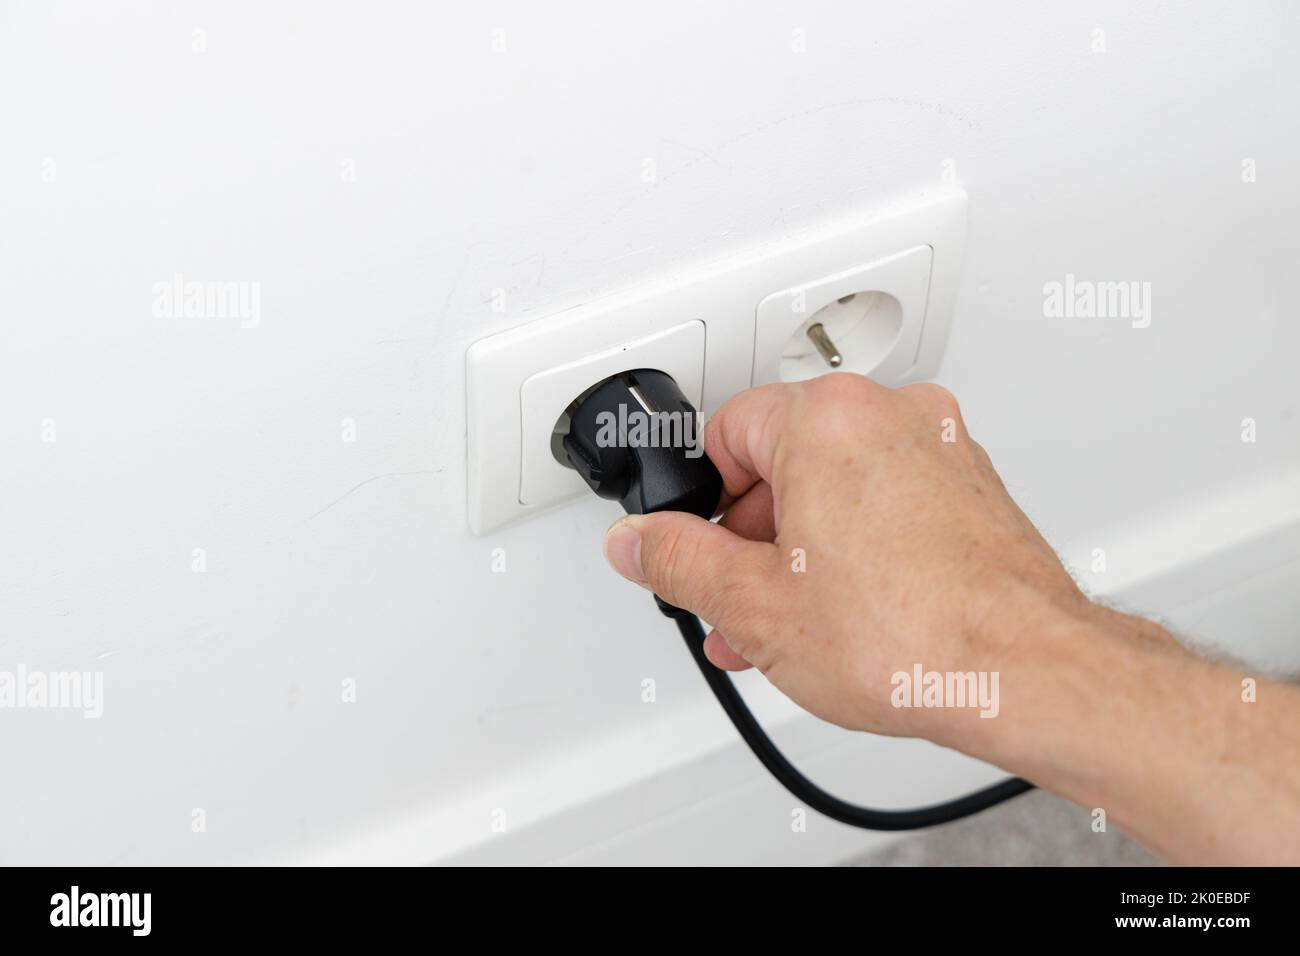 Saving energy at home, removing the plug from the socket Stock Photo